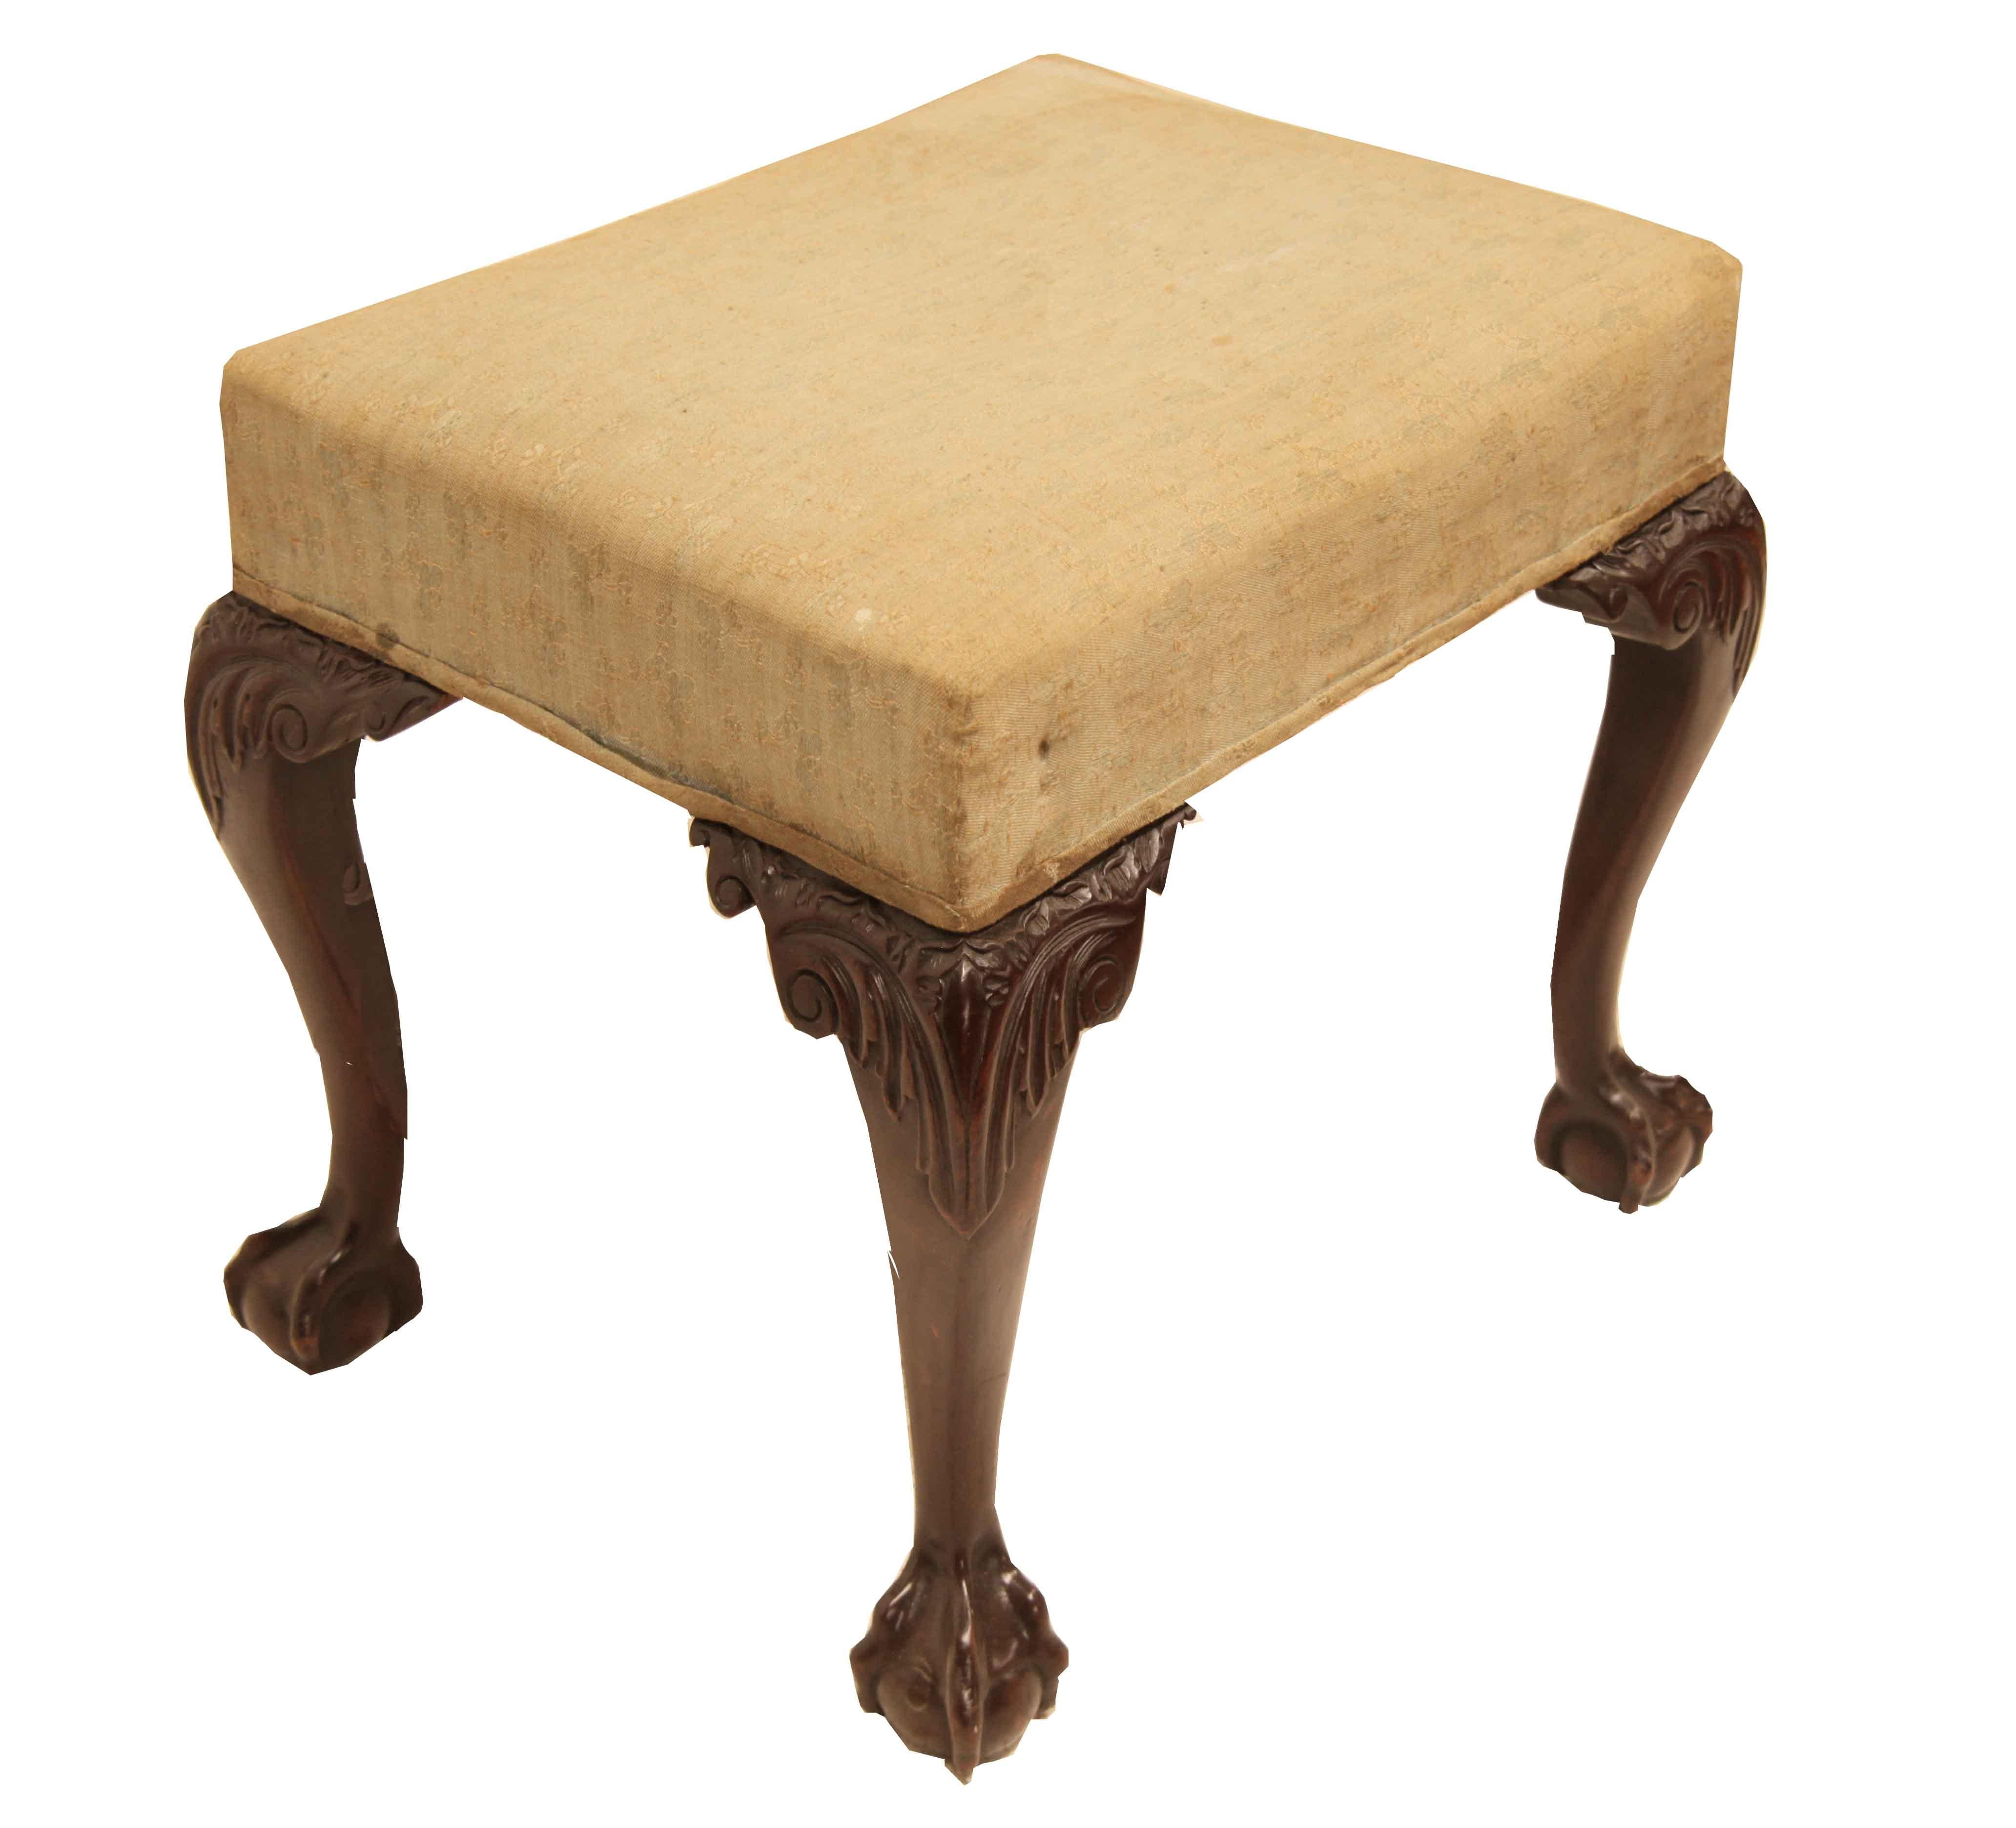 Chippendale style stool , the seat appears to have the original upholstery (needs changing).  The mahogany legs have a nice cabriole shape with carved acanthus knee terminating with a well developed ball and claw foot.